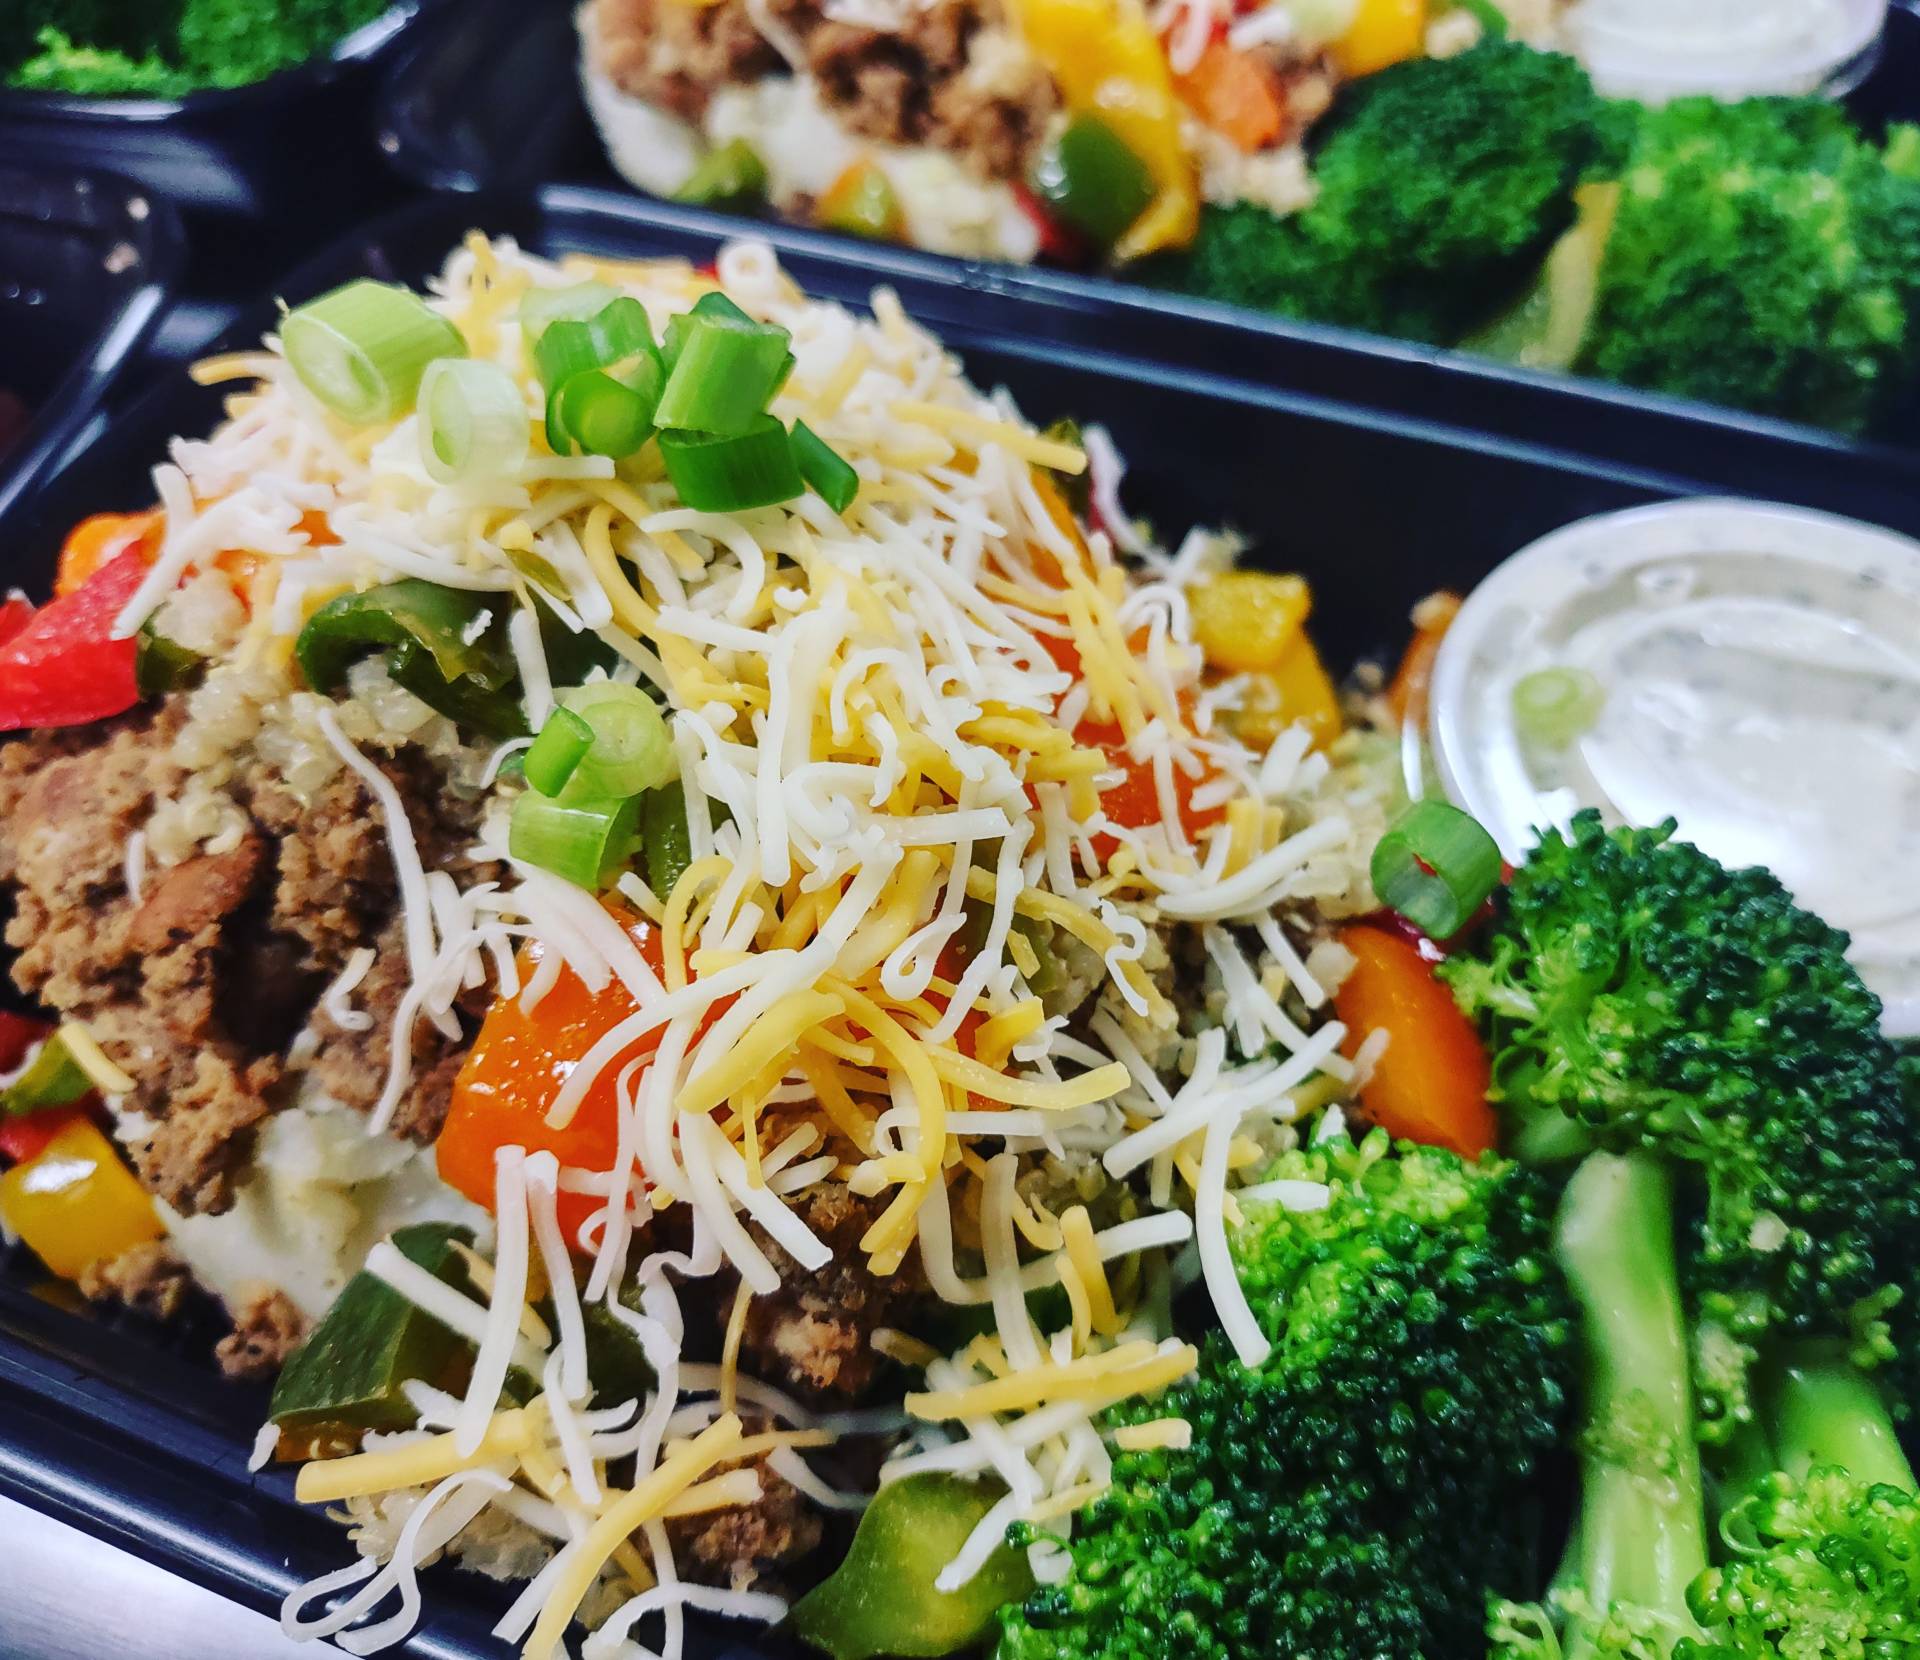 Baked Sweet Potato w/Seasoned Grass-fed Beef, Peppers, Blended Cheddar & Green Onions...Broccolini.